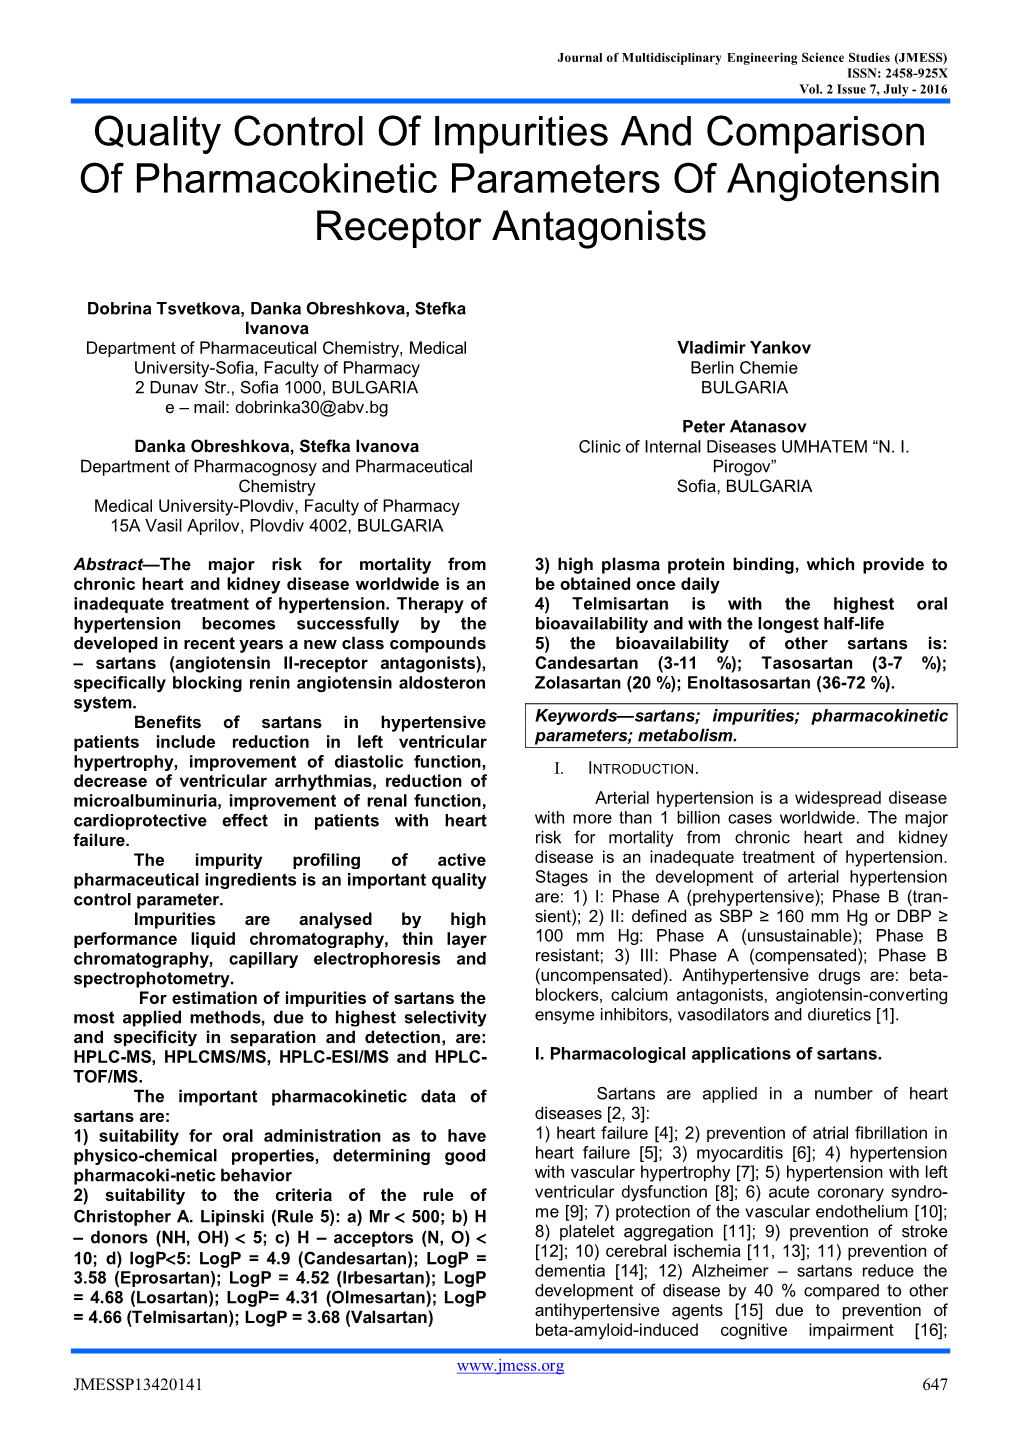 Quality Control of Impurities and Comparison of Pharmacokinetic Parameters of Angiotensin Receptor Antagonists